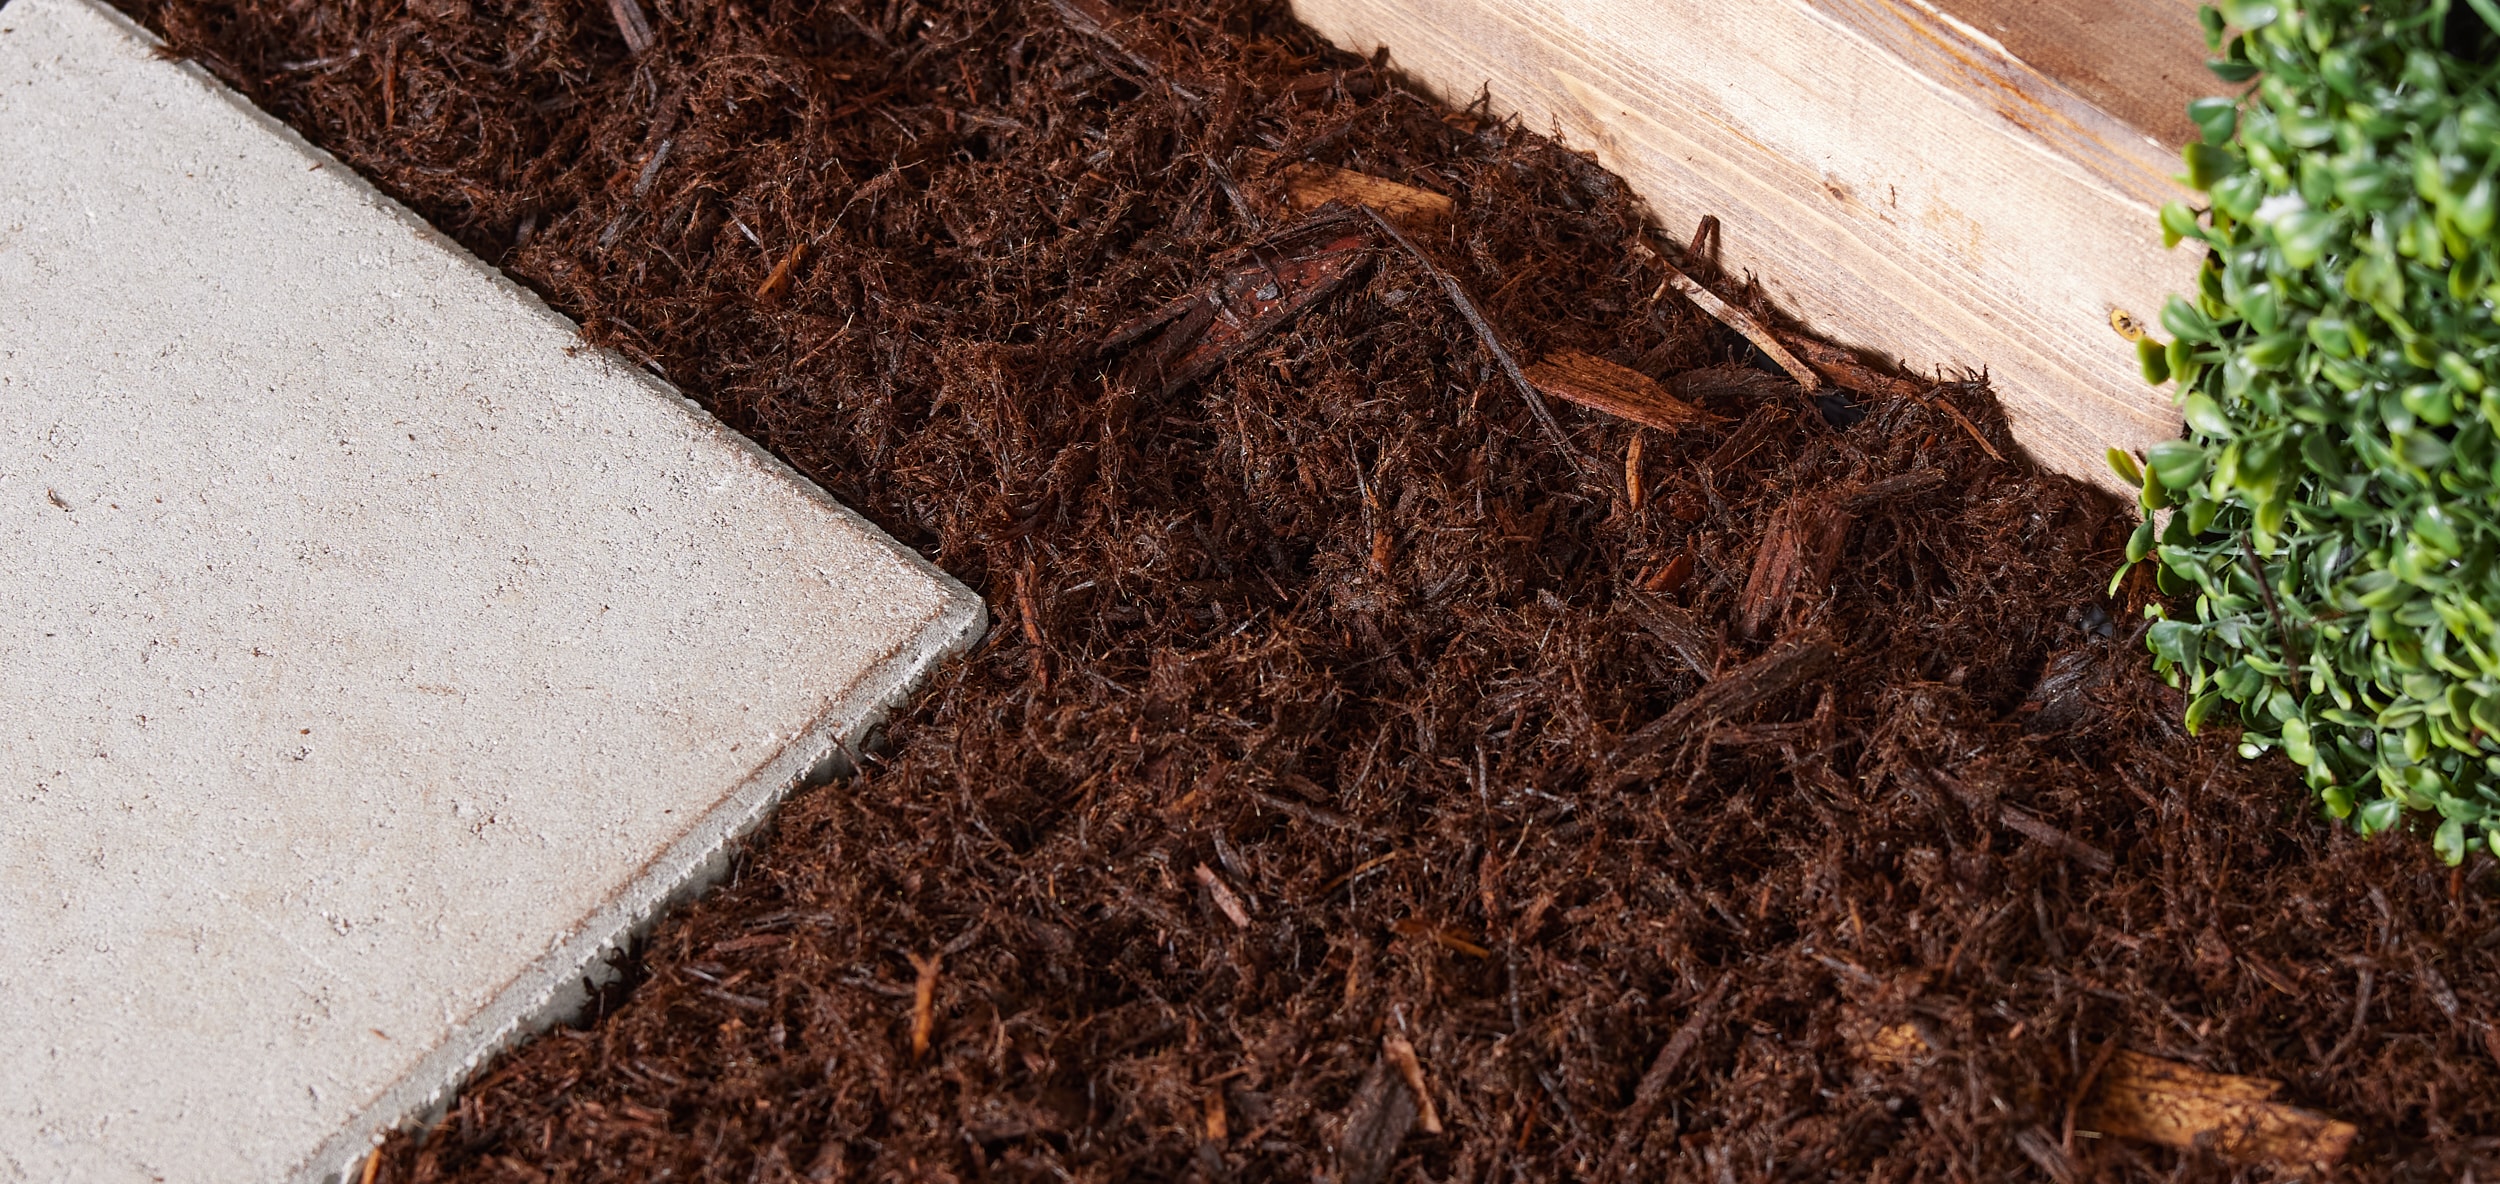 & Wood at department Blend 2-cu ft Mulch Bagged Red the Products Cedar Mulch in Swanson Bark